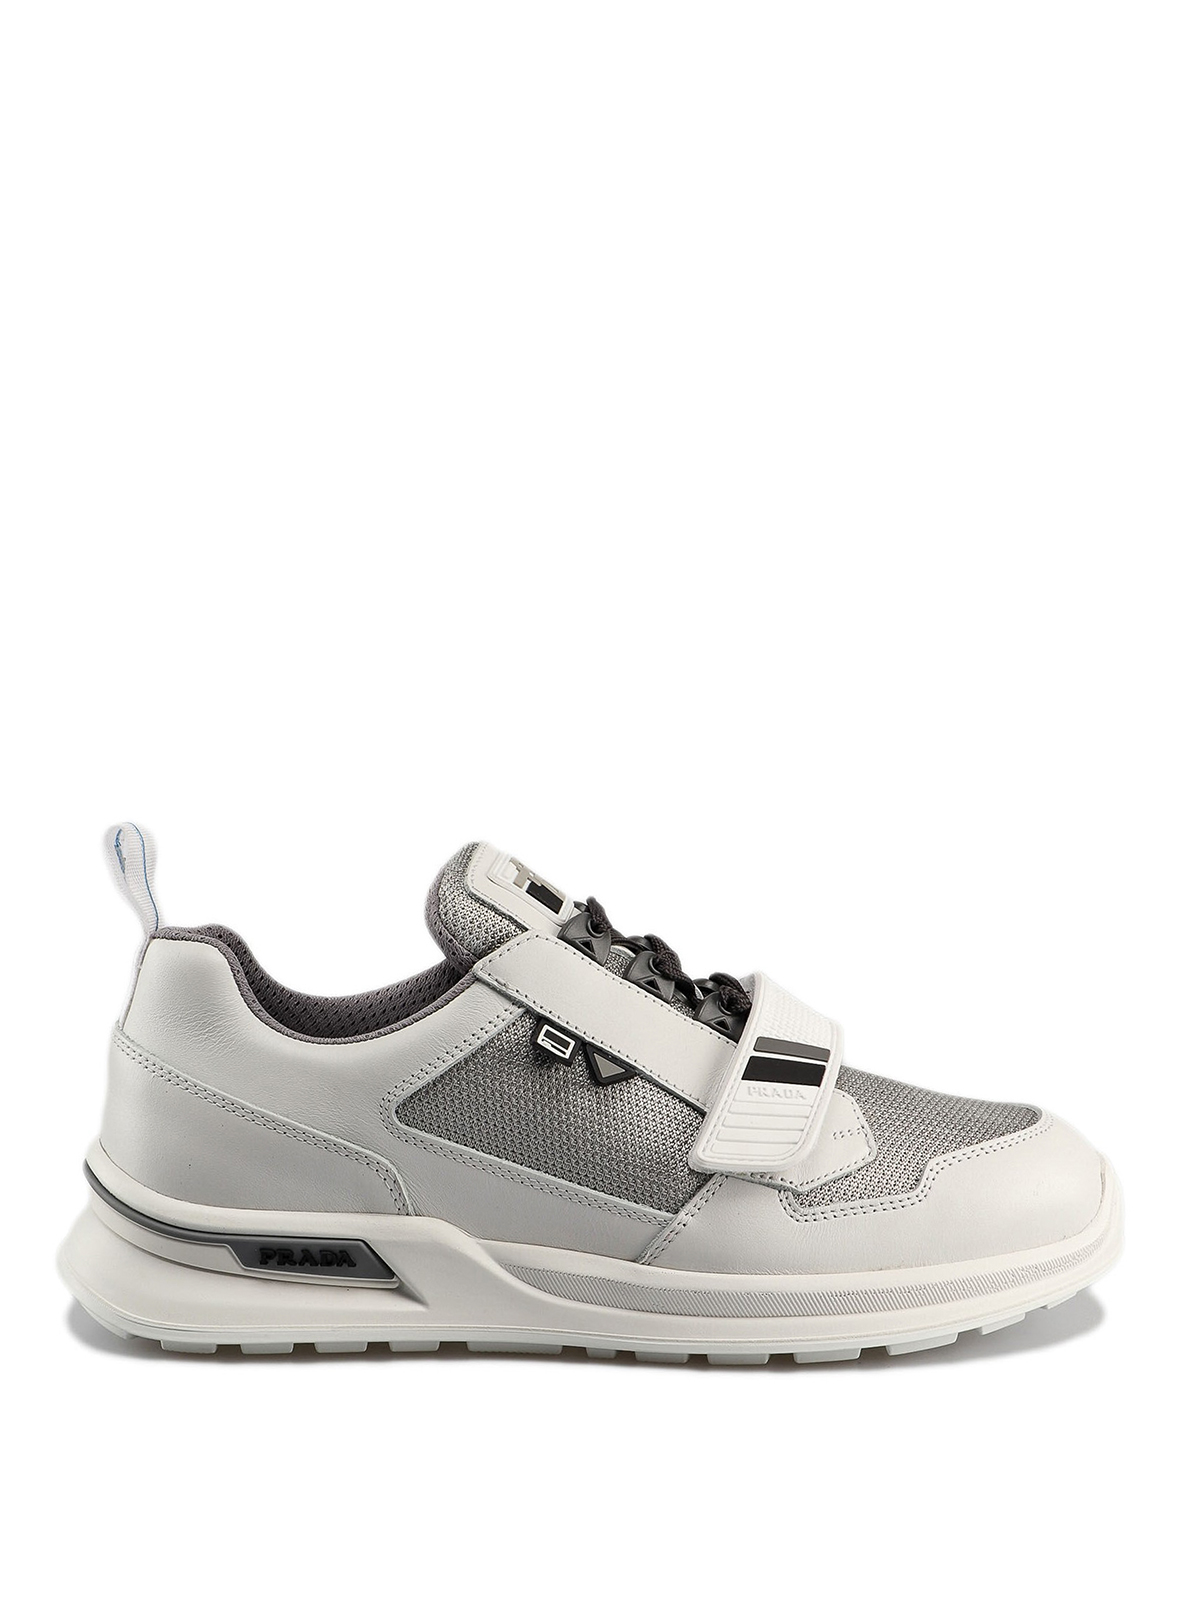 prada fabric and leather sneakers